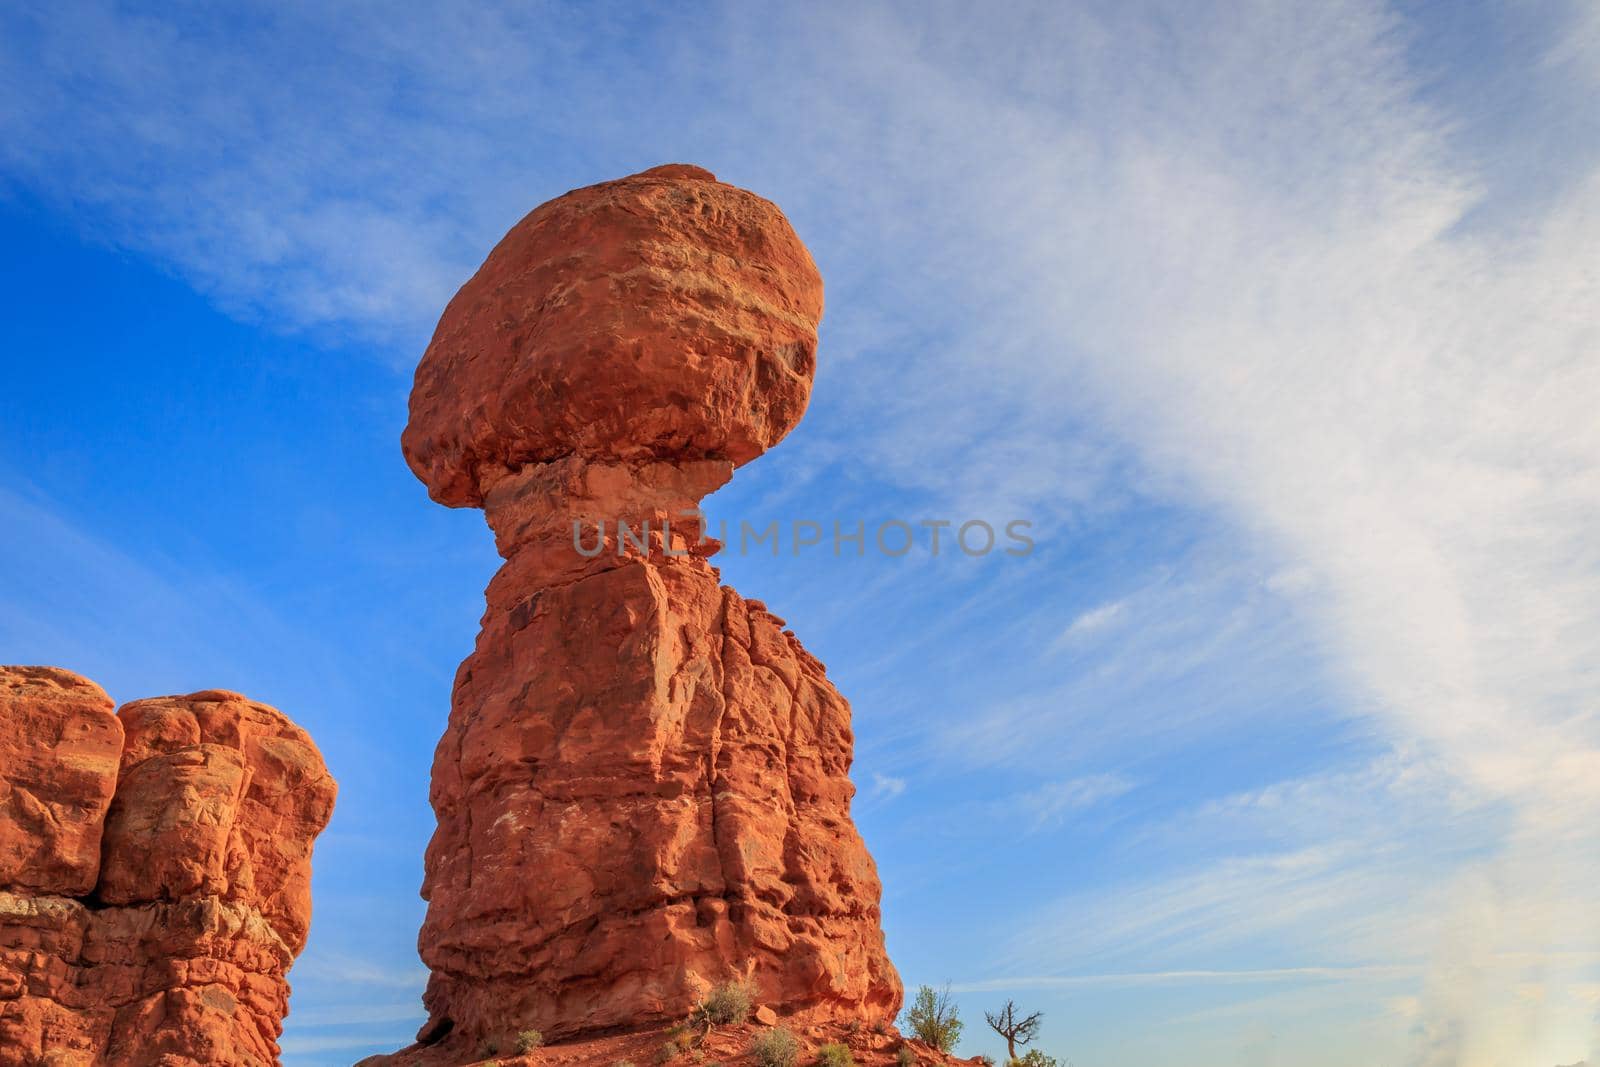 The Balanced Rock in Arches National Park, Utah.